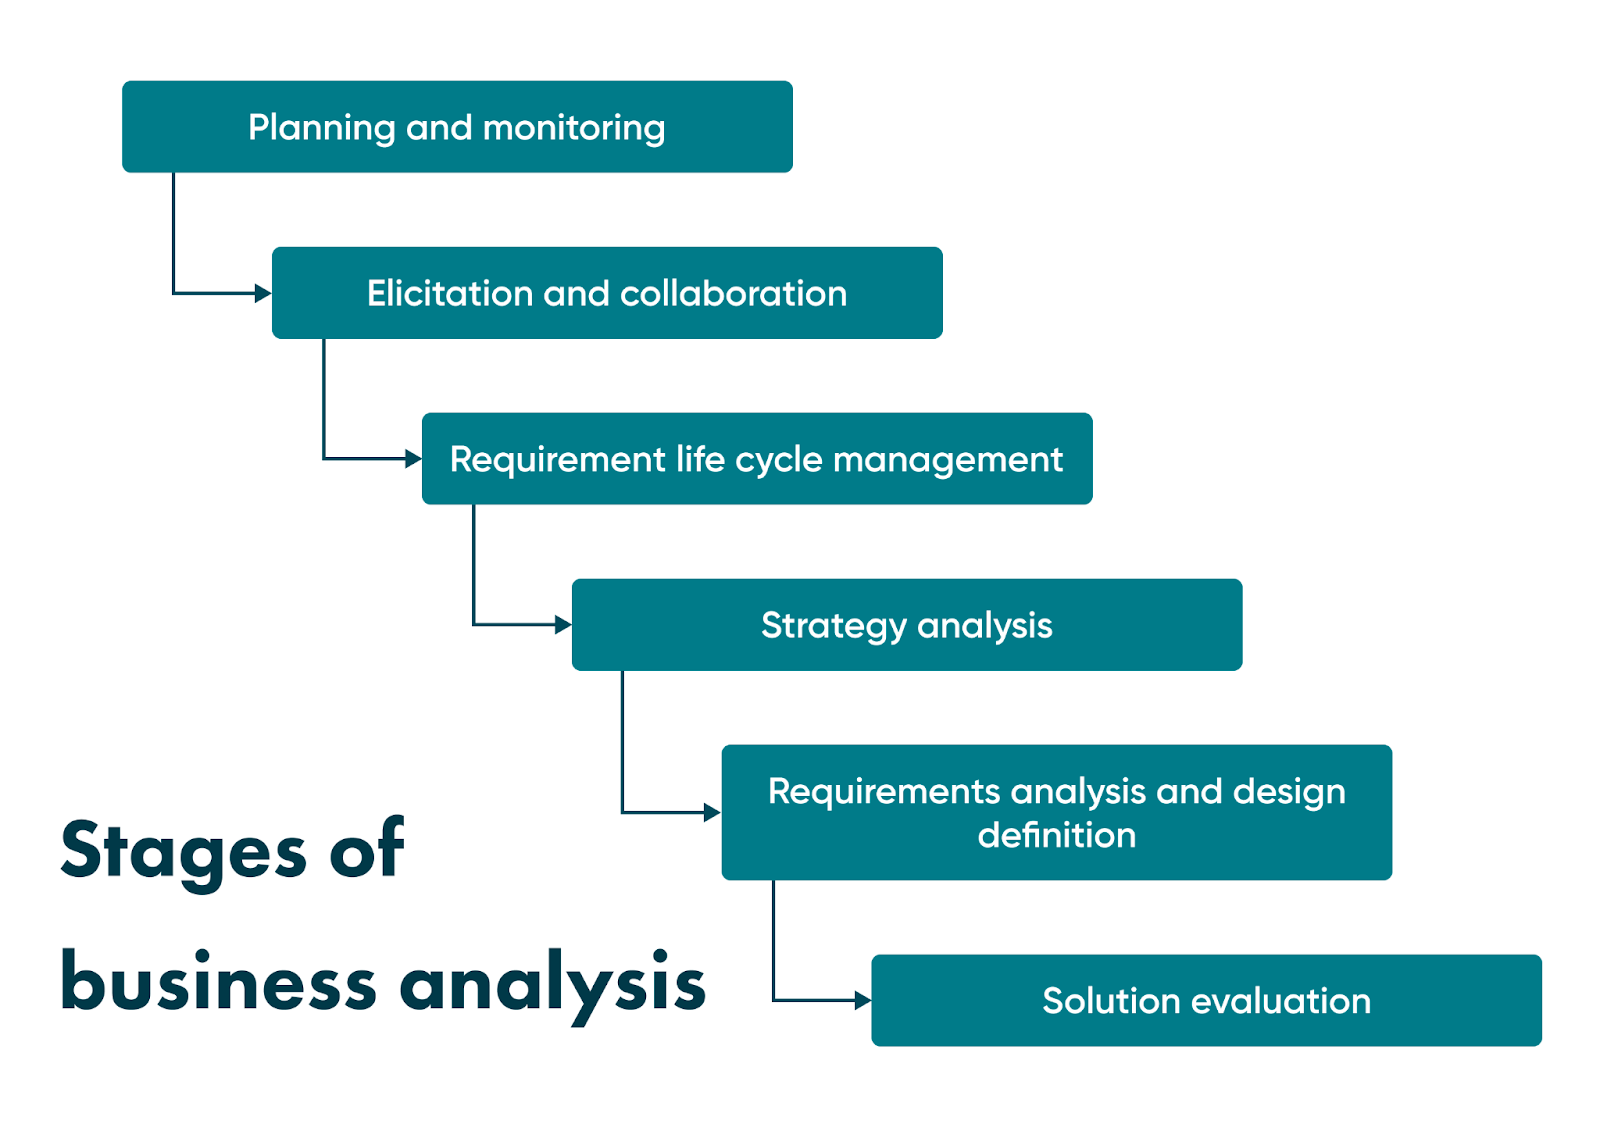 This article covers steps to conduct business analysis, types of business analysis, main advantages, and business analysis planning.